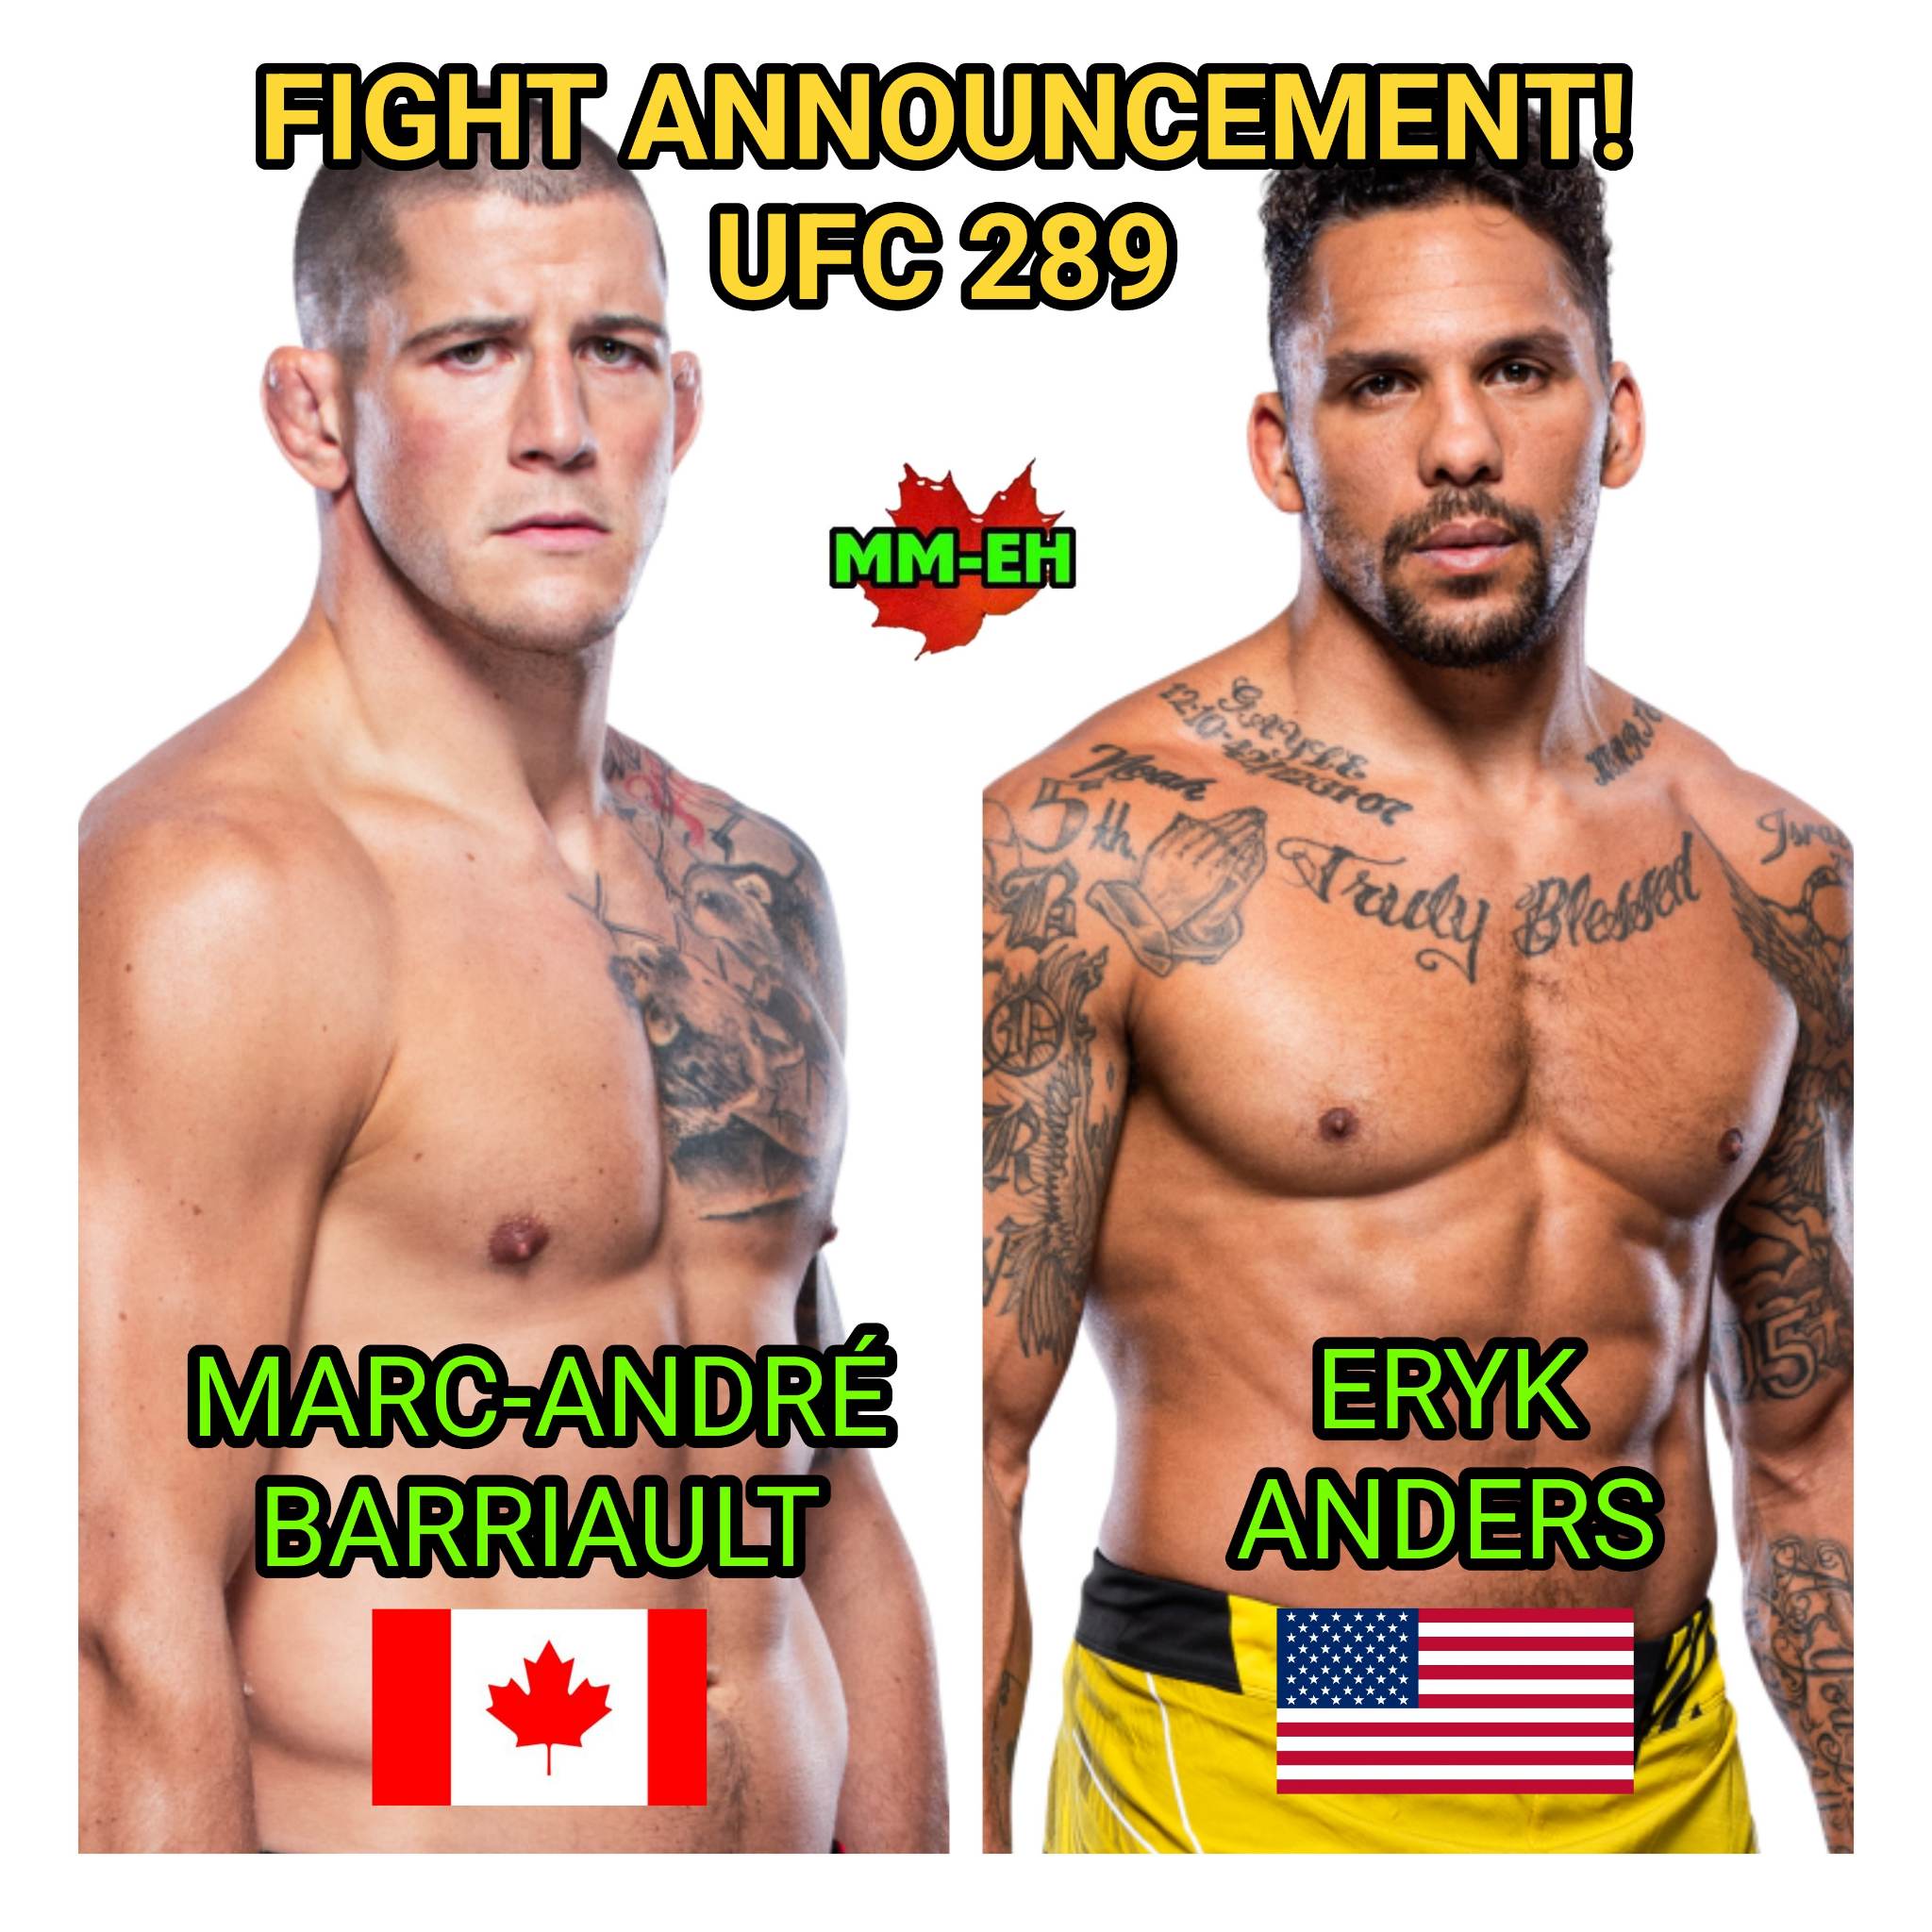 Barriault-Anders UFC 289 MM-eh